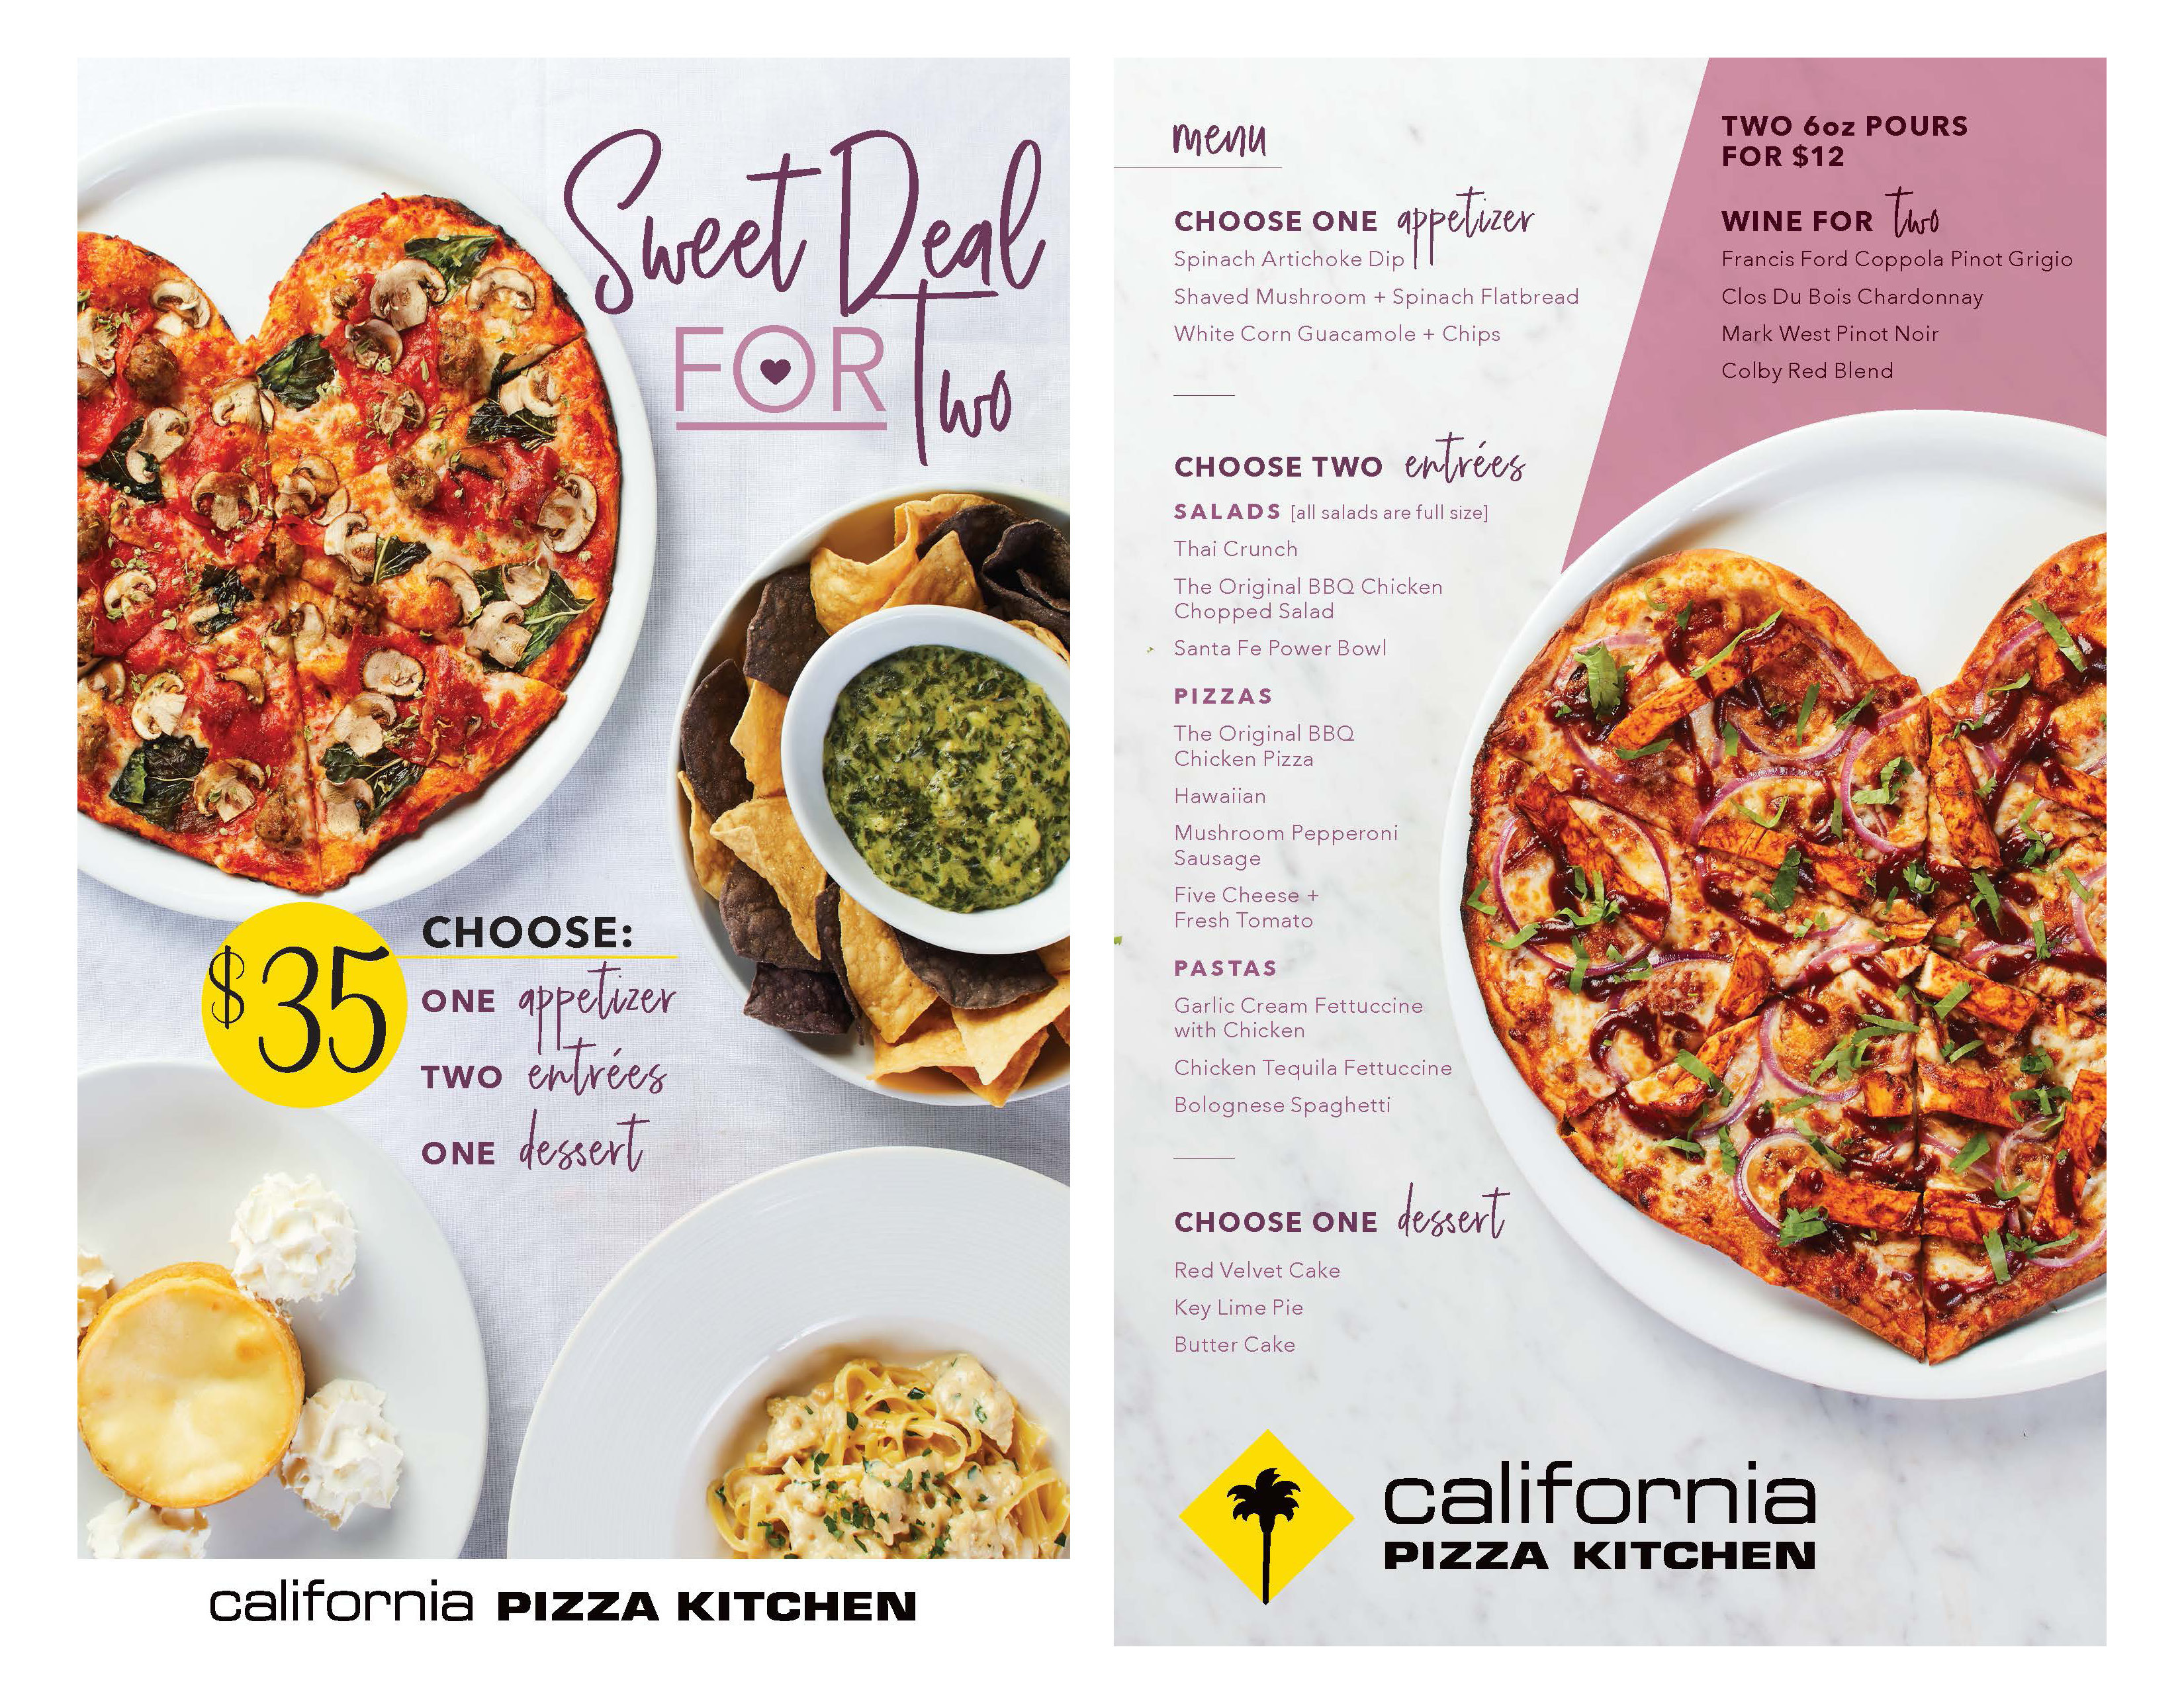 California Pizza Kitchen Dishes Out the Love This Valentine’s Day With